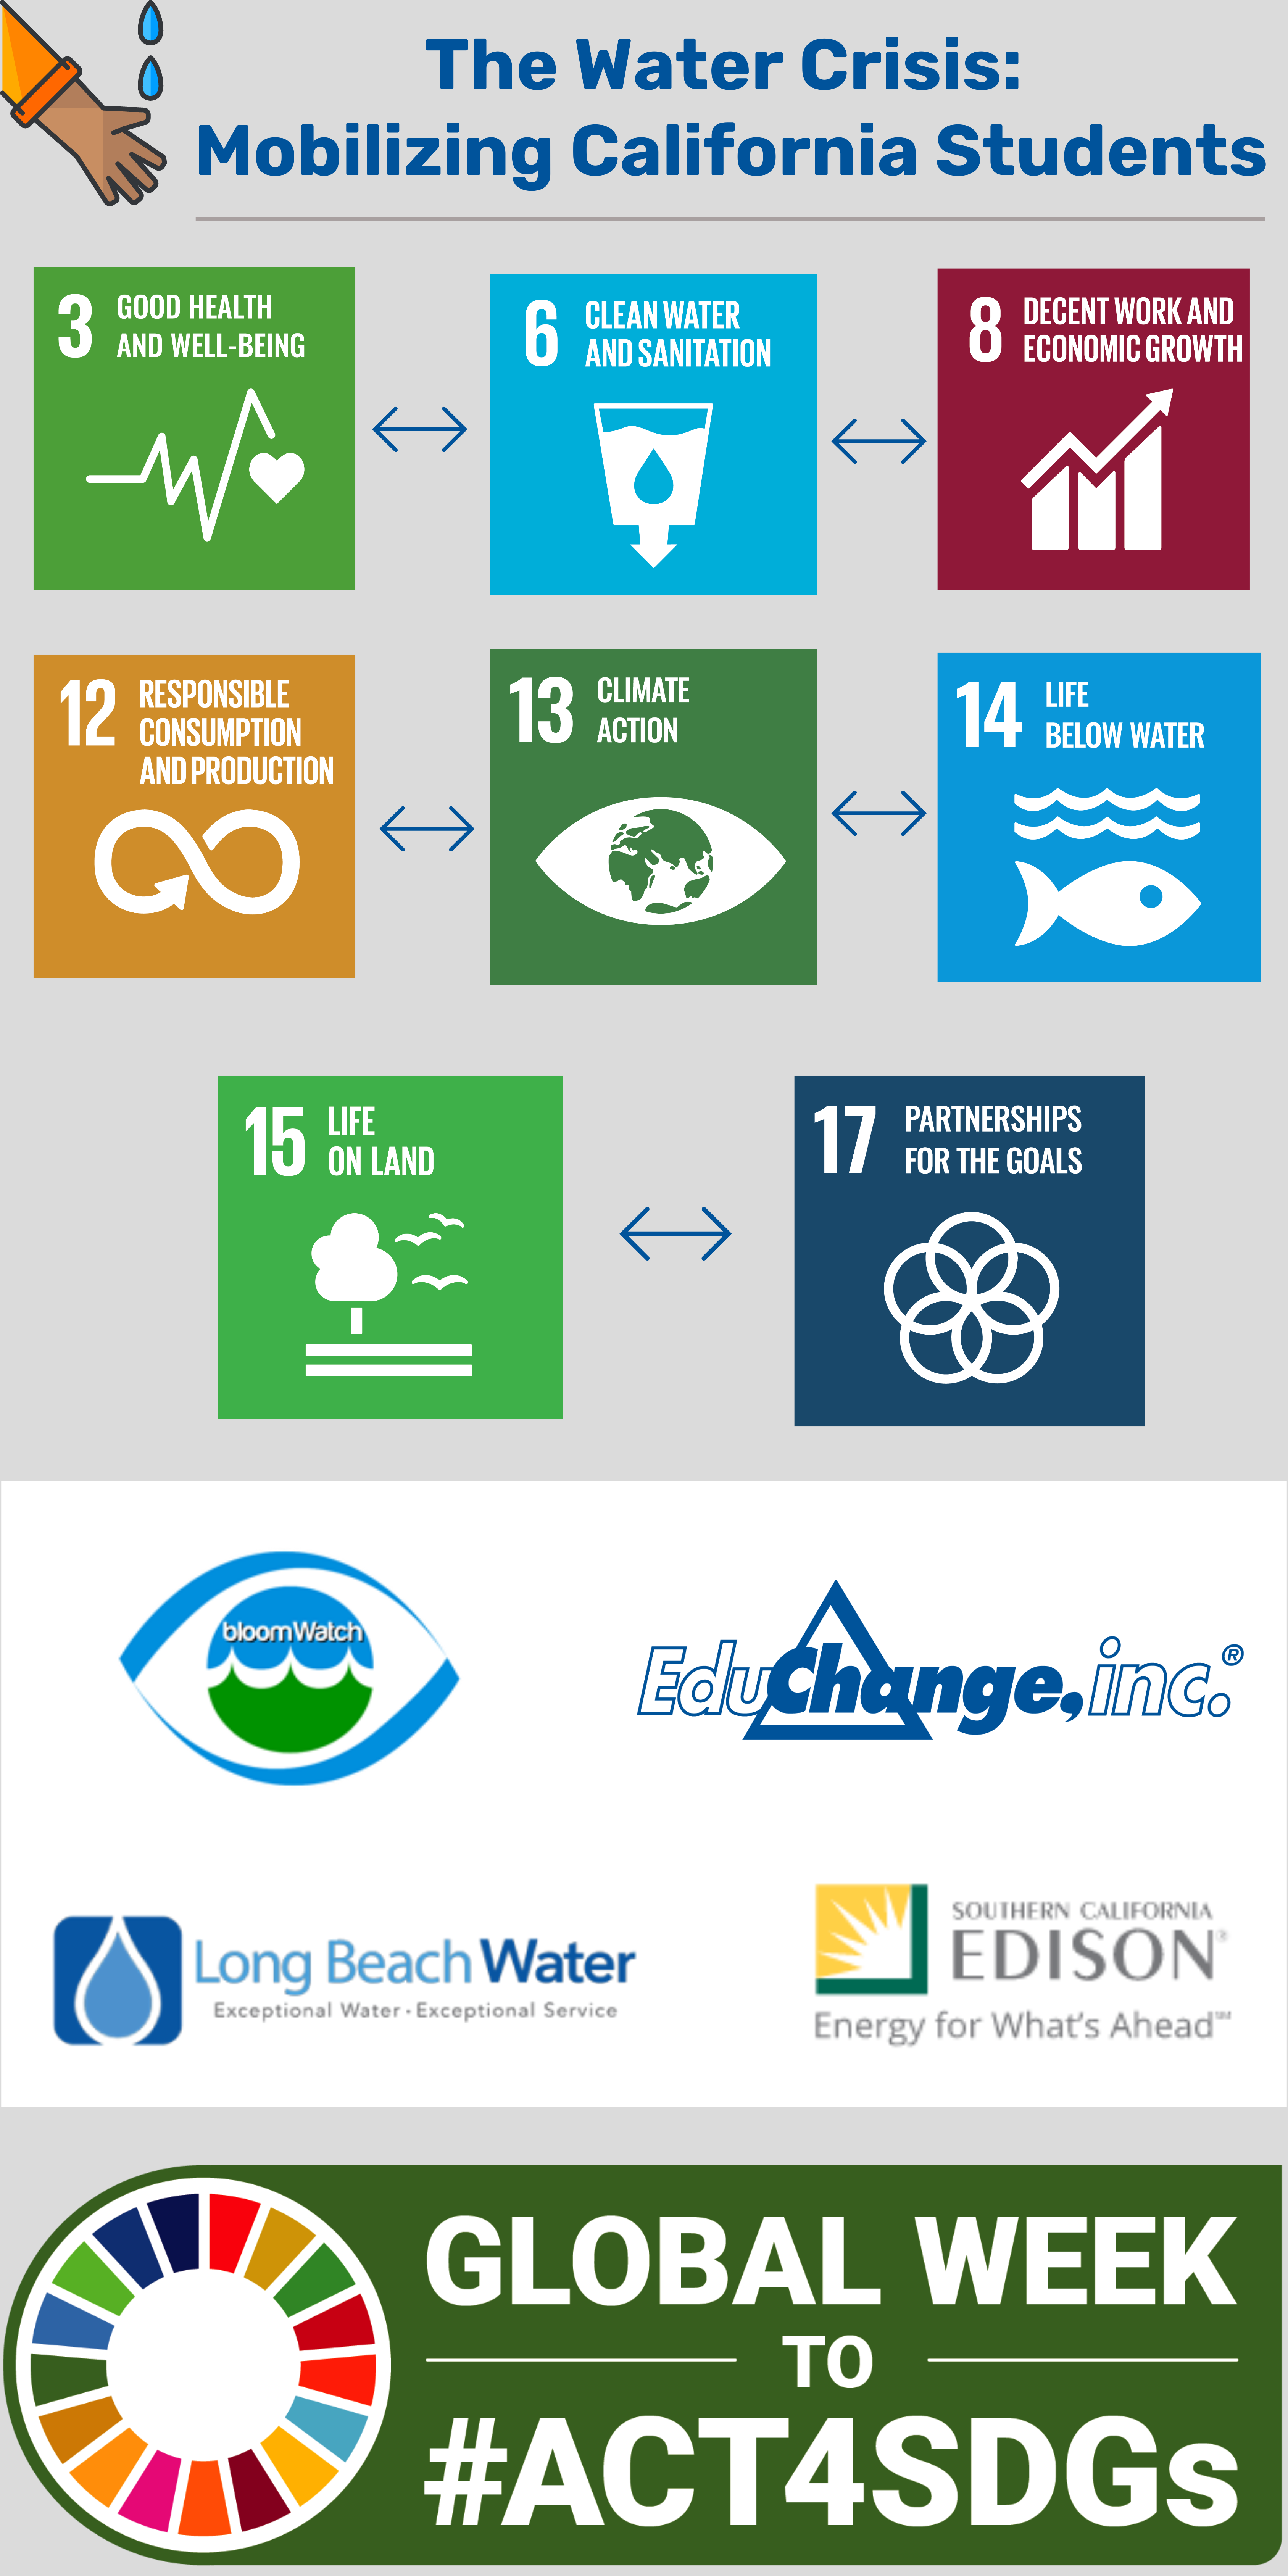 Place-based STEM in California schools helps Mobilize California Students for the Water Crisis. The image depicts all 8 SDG icons that are interconnected with 4 logos of participating organizations: EduChange, Long Beach Water Department,, Bloomwatch and SoCal Edison